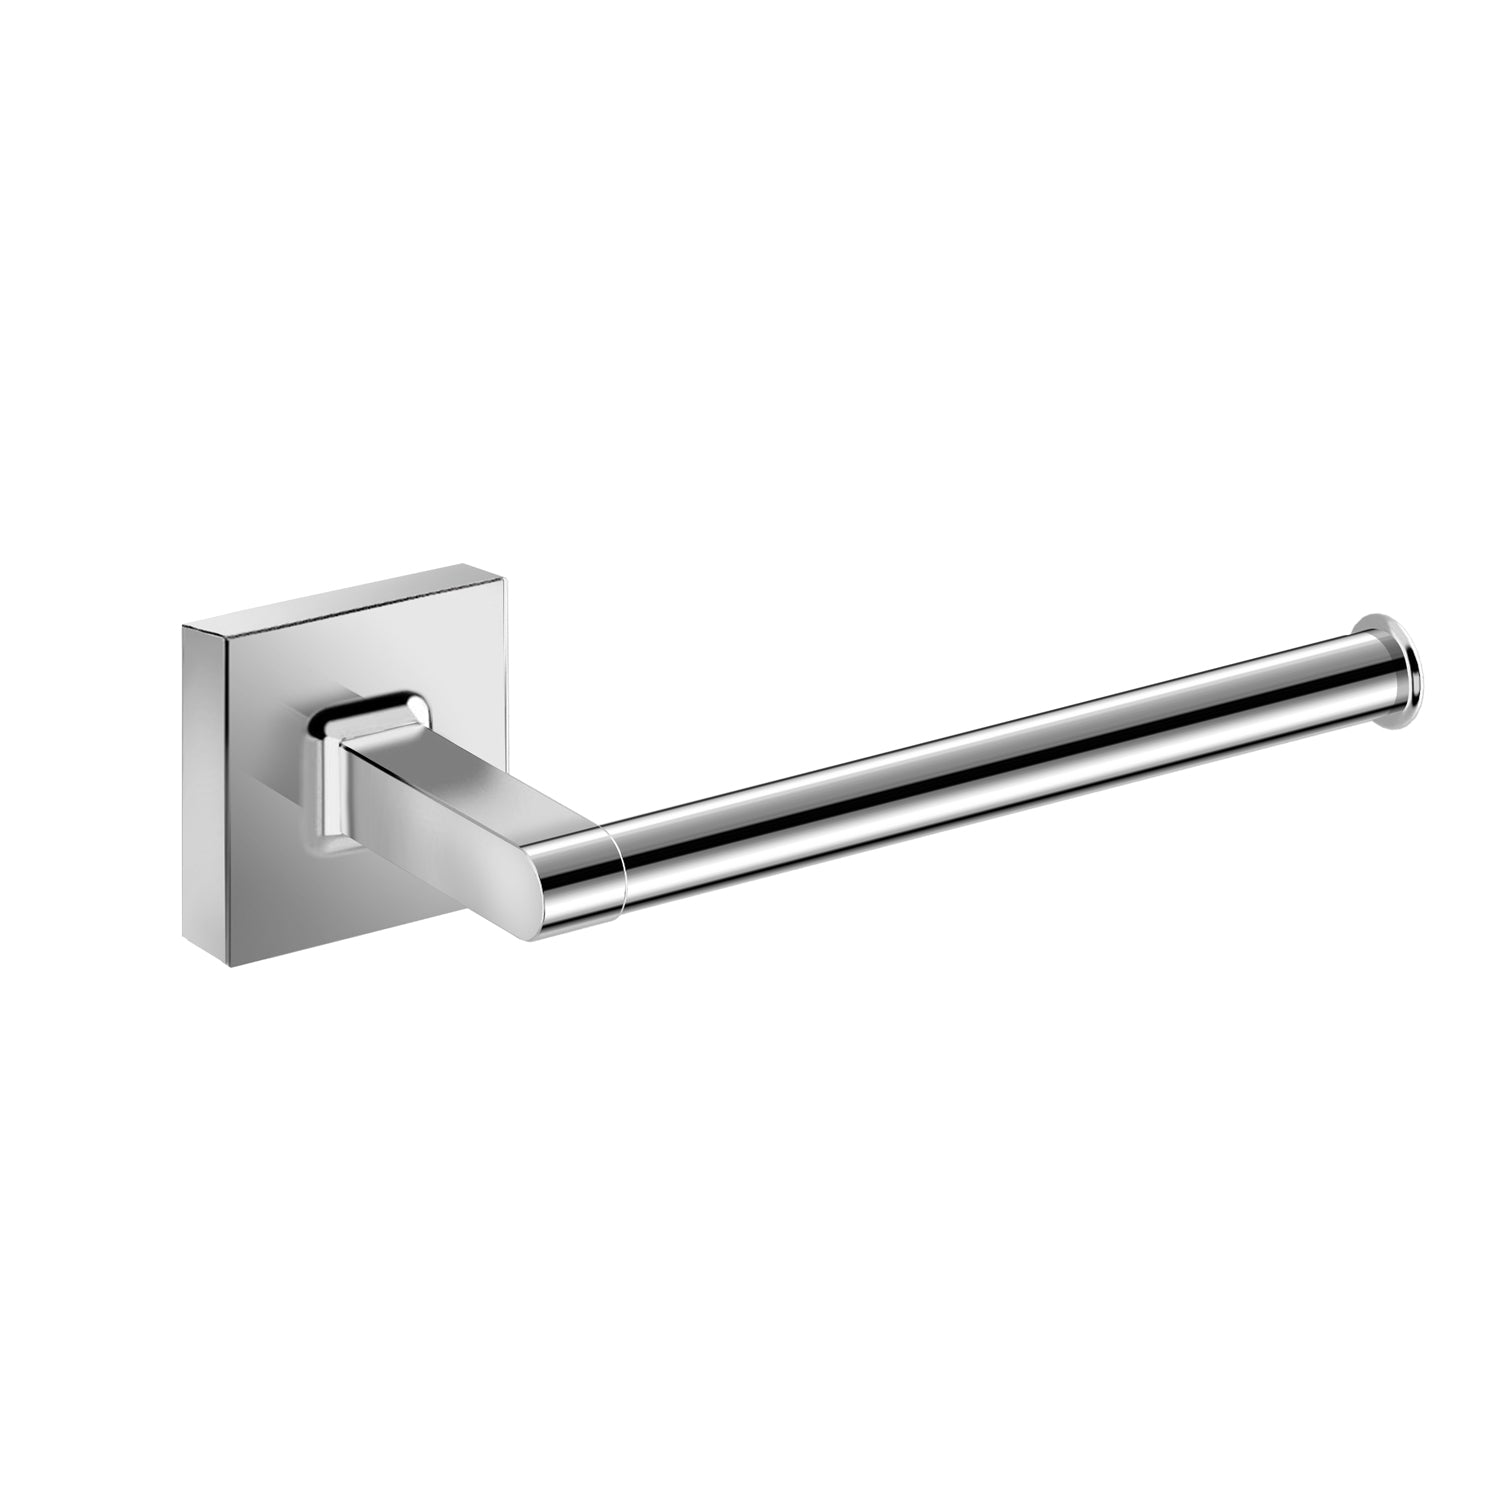 DAX Milano Toilet Paper Holder, Right Opening, Square Line, Wall Mount, Brass Body, Chrome Finish, 2-3/4 x 7-1/2 x 3-3/8 Inches